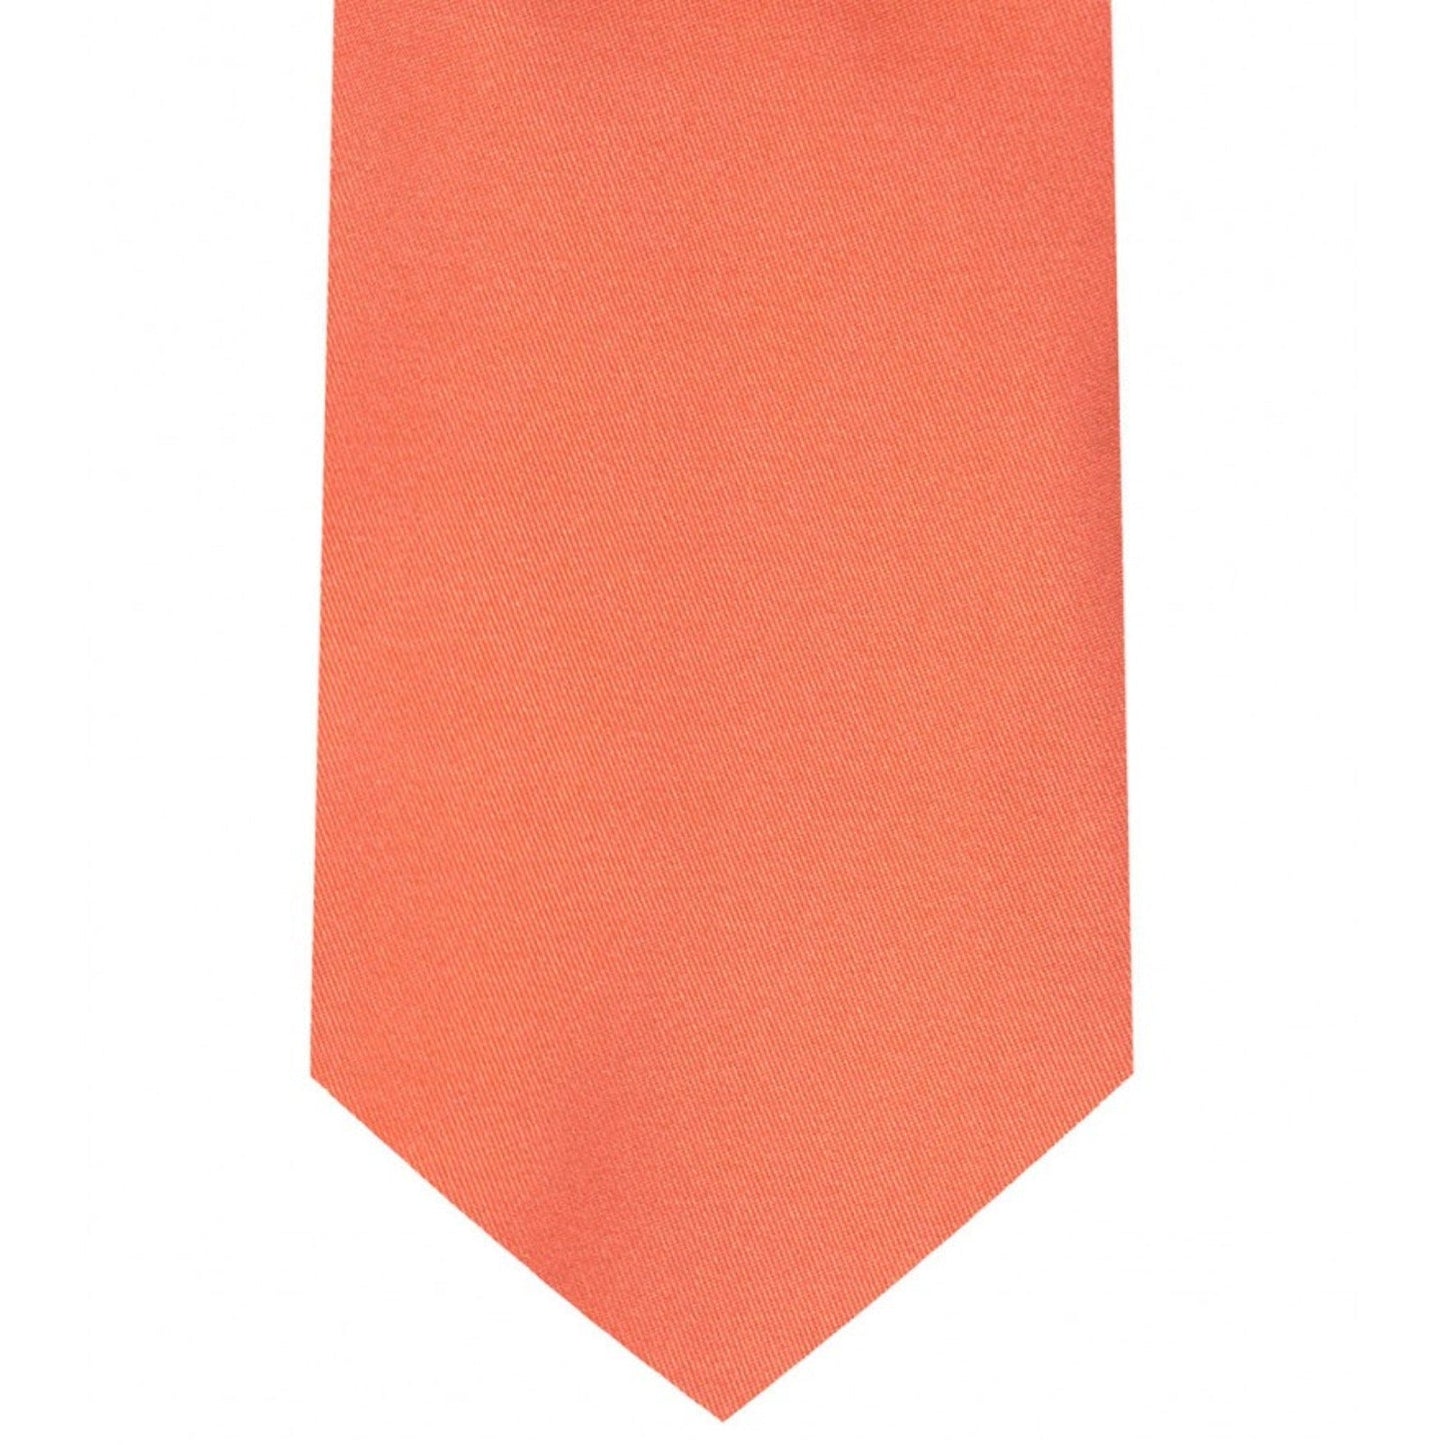 Classic Coral Tie Regular width 3.5 inches With Matching Pocket Square | KCT Menswear 